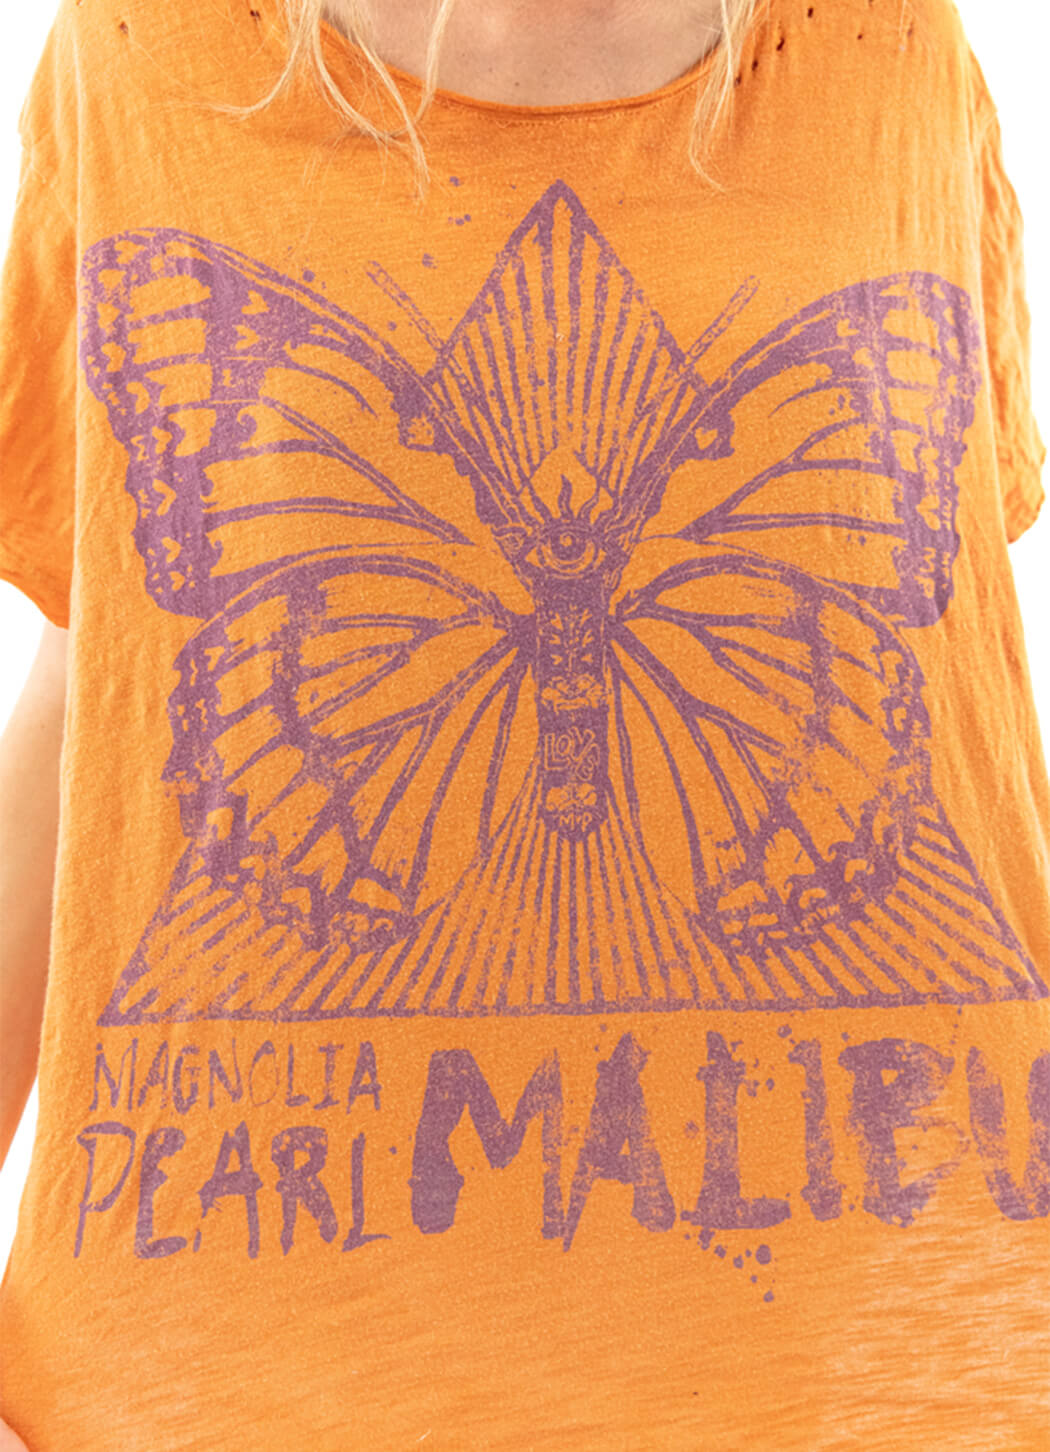 MP MALIBU BEAUTY TEE-VISION - Kingfisher Road - Online Boutique